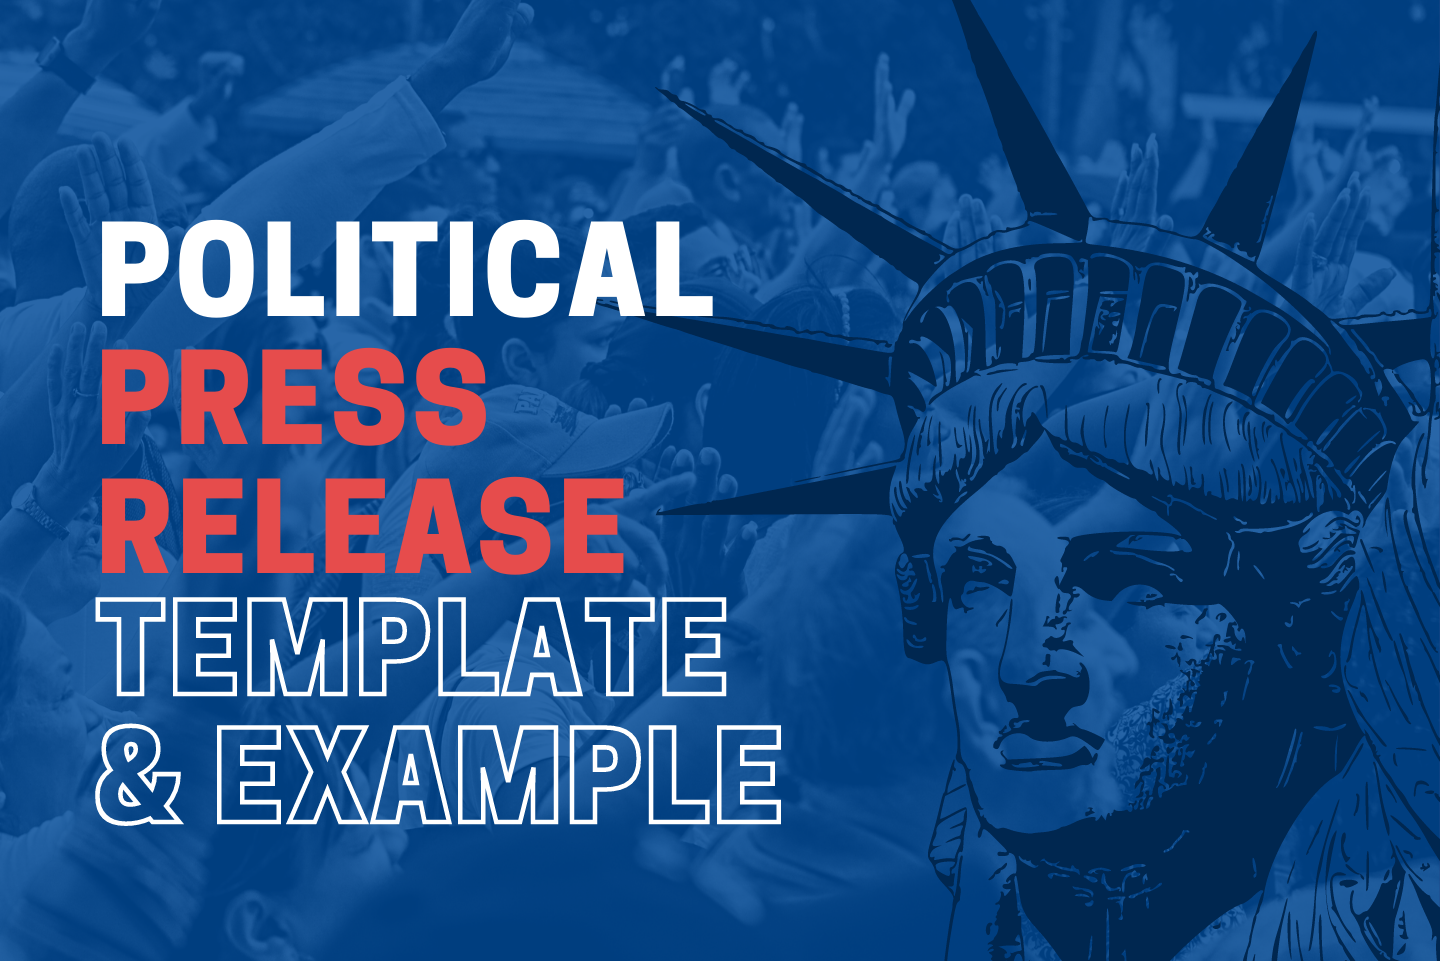 Political Press Release Template Example Global News Distribution